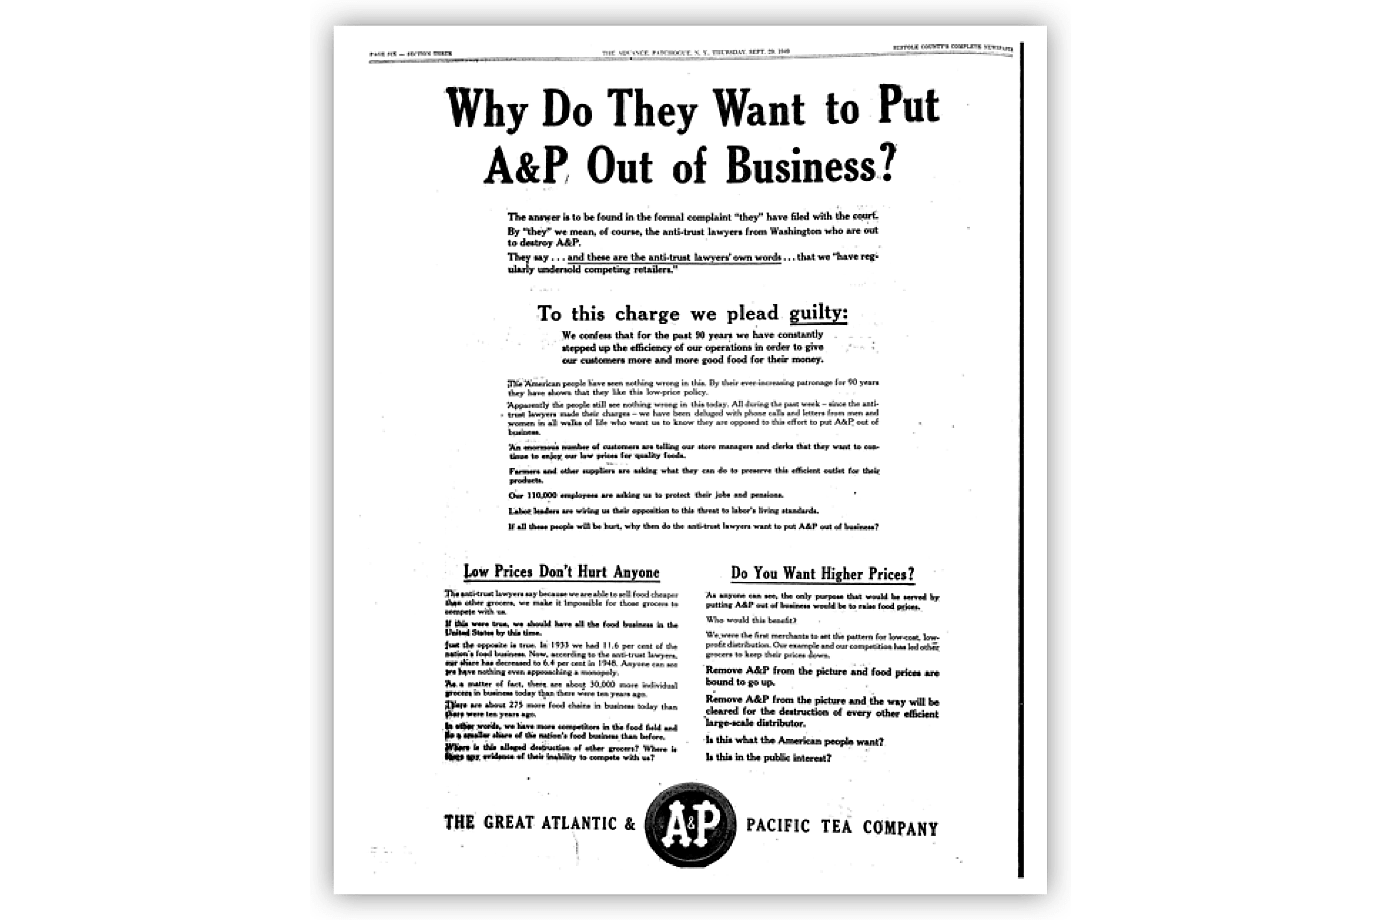 "Why Do They Want to Put A&P Out of Business?" Newspaper Ad